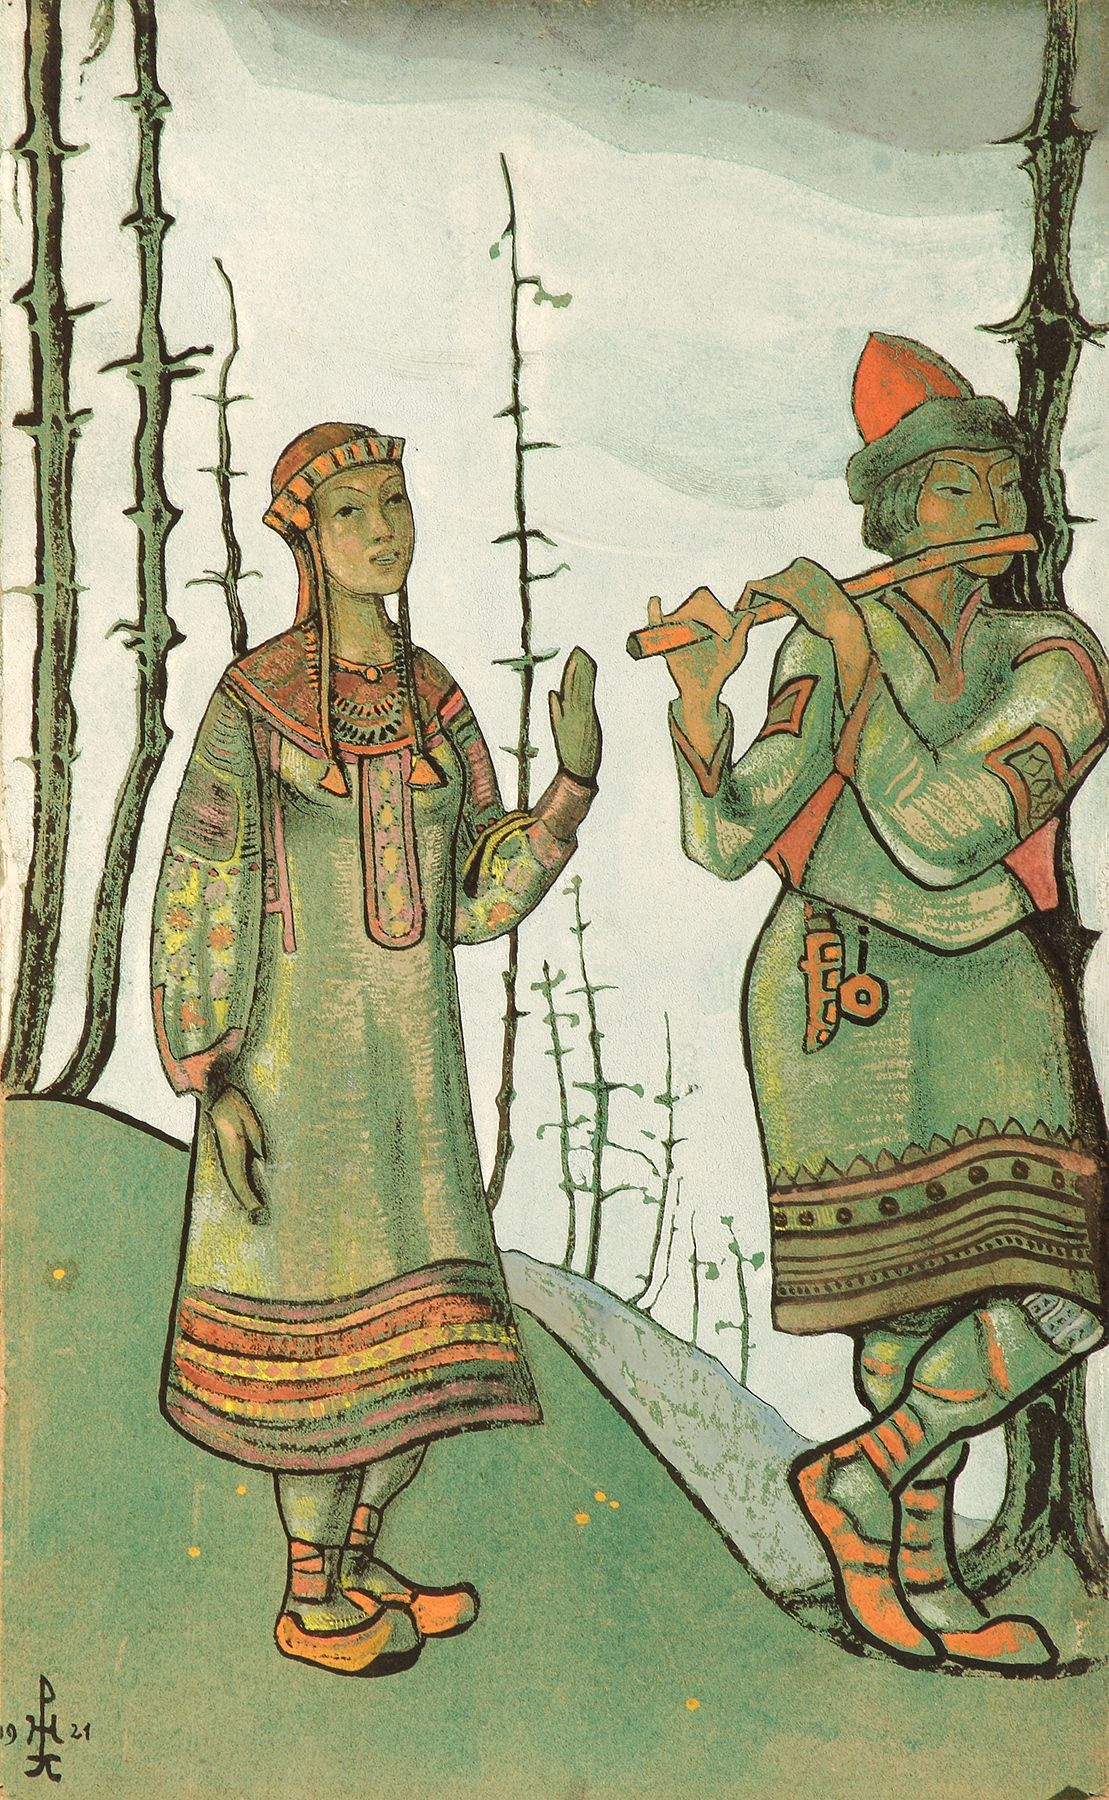 Nicholas Roerich. The snow maiden and LEL. Sketch for "the snow maiden" Opera by N.. Rimsky-Korsakov and the play A. N. Ostrovsky